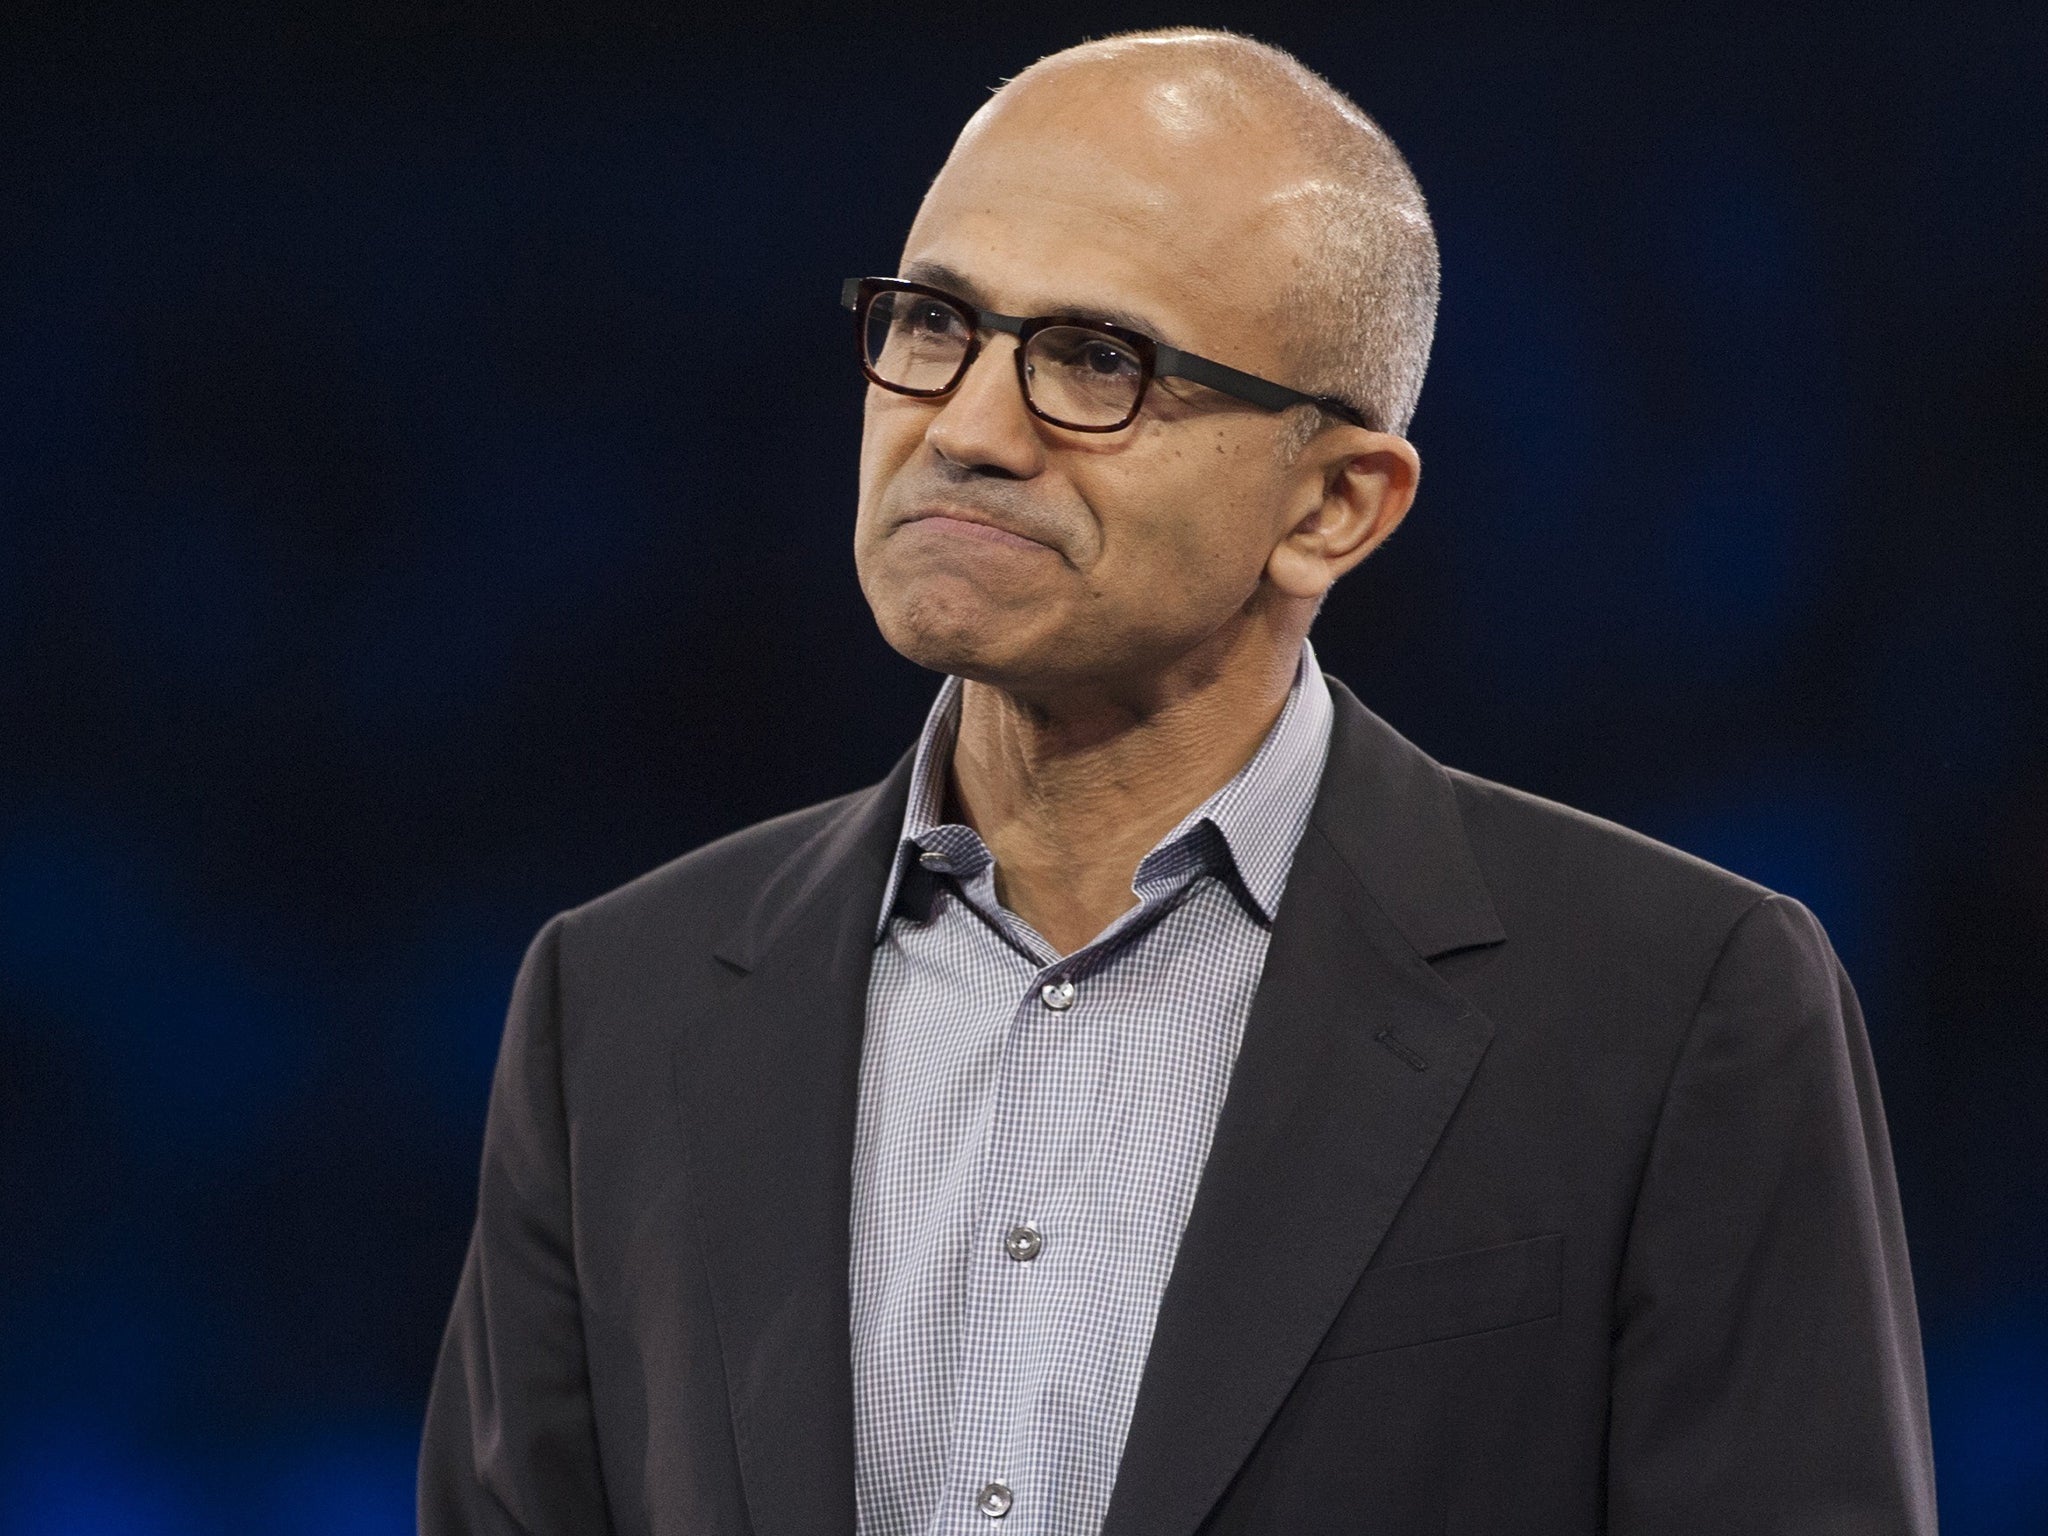 The new CEO of Microsoft, Satya Nadella, suggested it was 'good karma' not to ask for a pay rise